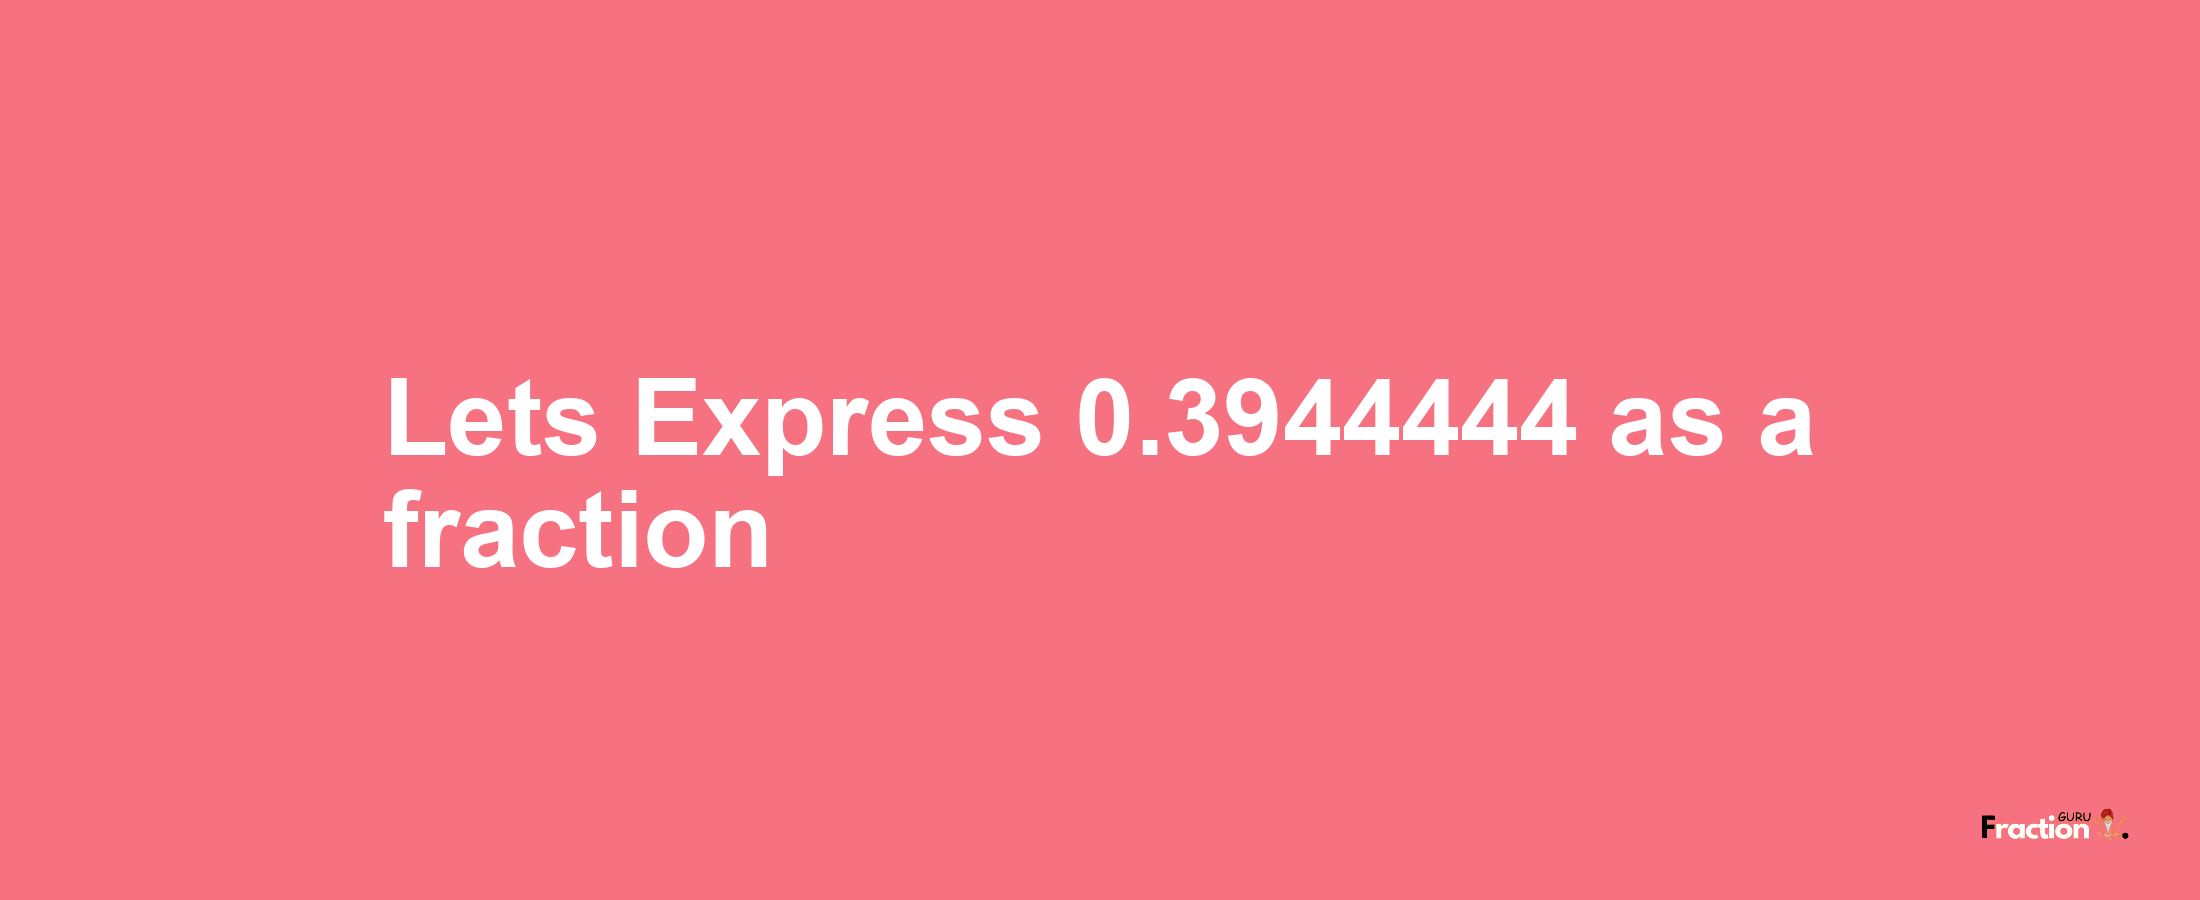 Lets Express 0.3944444 as afraction